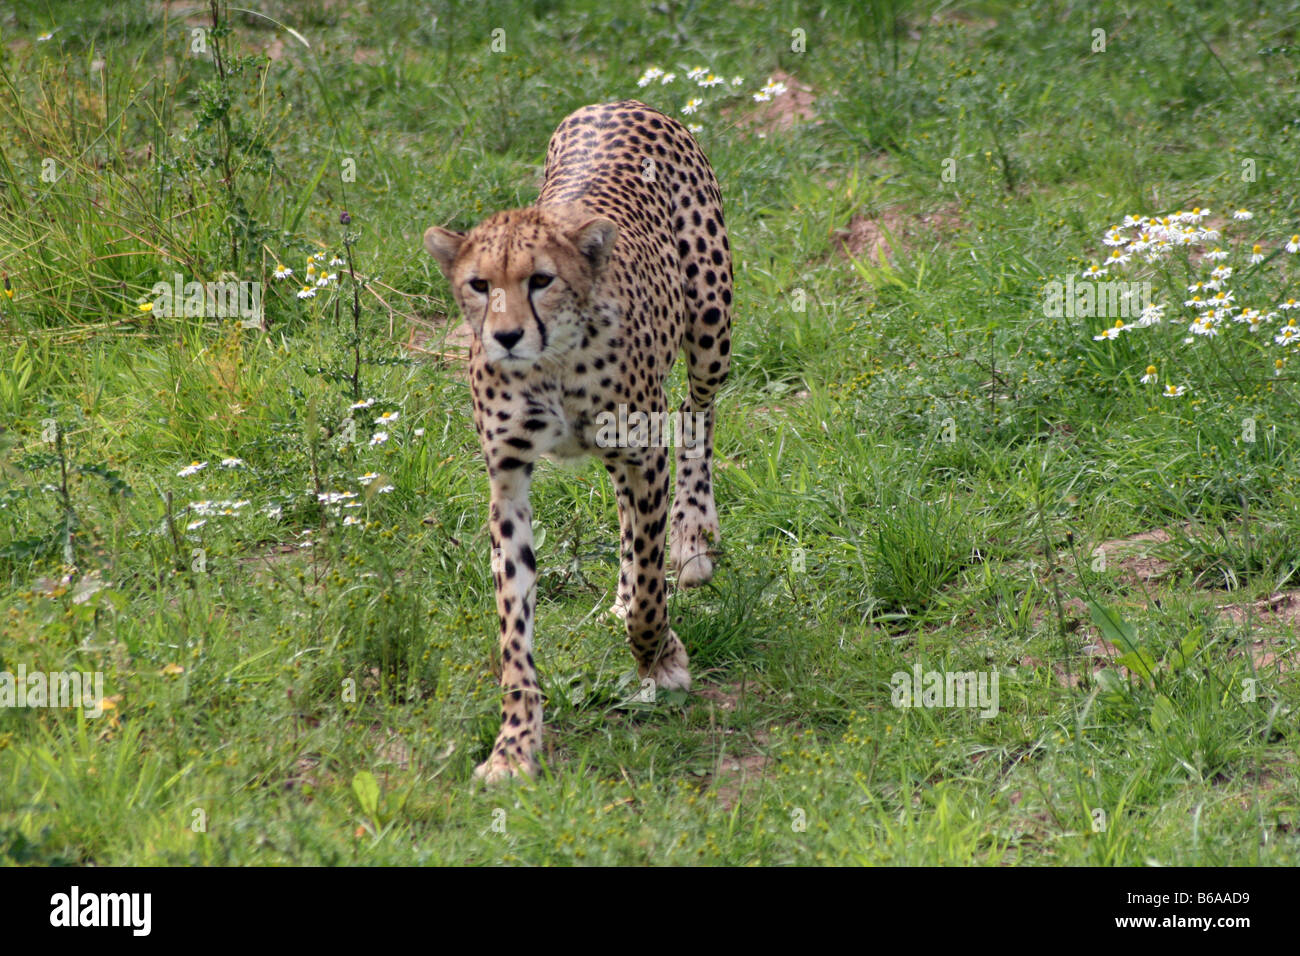 Cheetah Stalking Alert in Grass [Chester Zoo, Chester, Cheshire, England, Great Britain, United Kingdom, Europe].              . Stock Photo